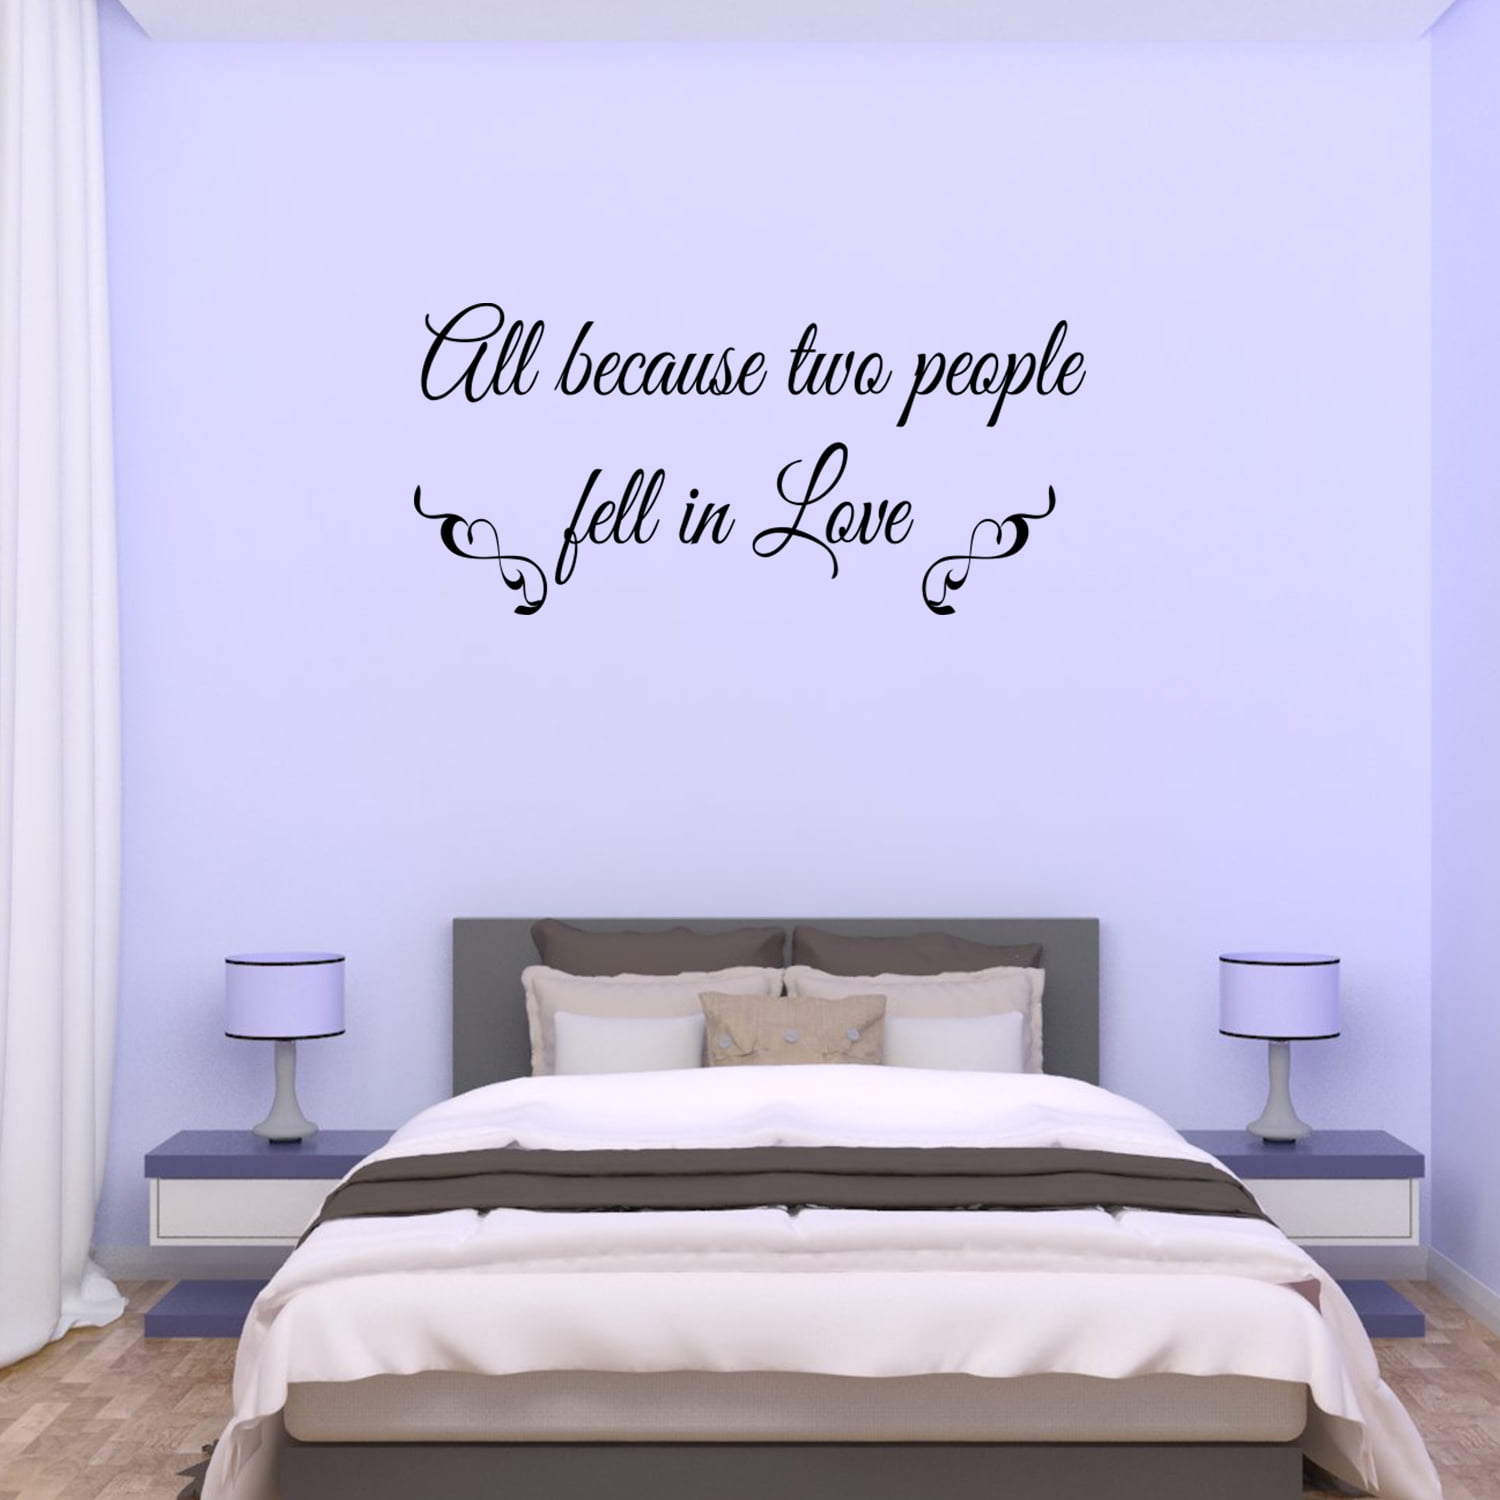 Romantic Decor Anniversary Art Gift Personalized Bedroom Mural -When Inlove Her King and His Queen Sticker Couple Goals Wall Decal